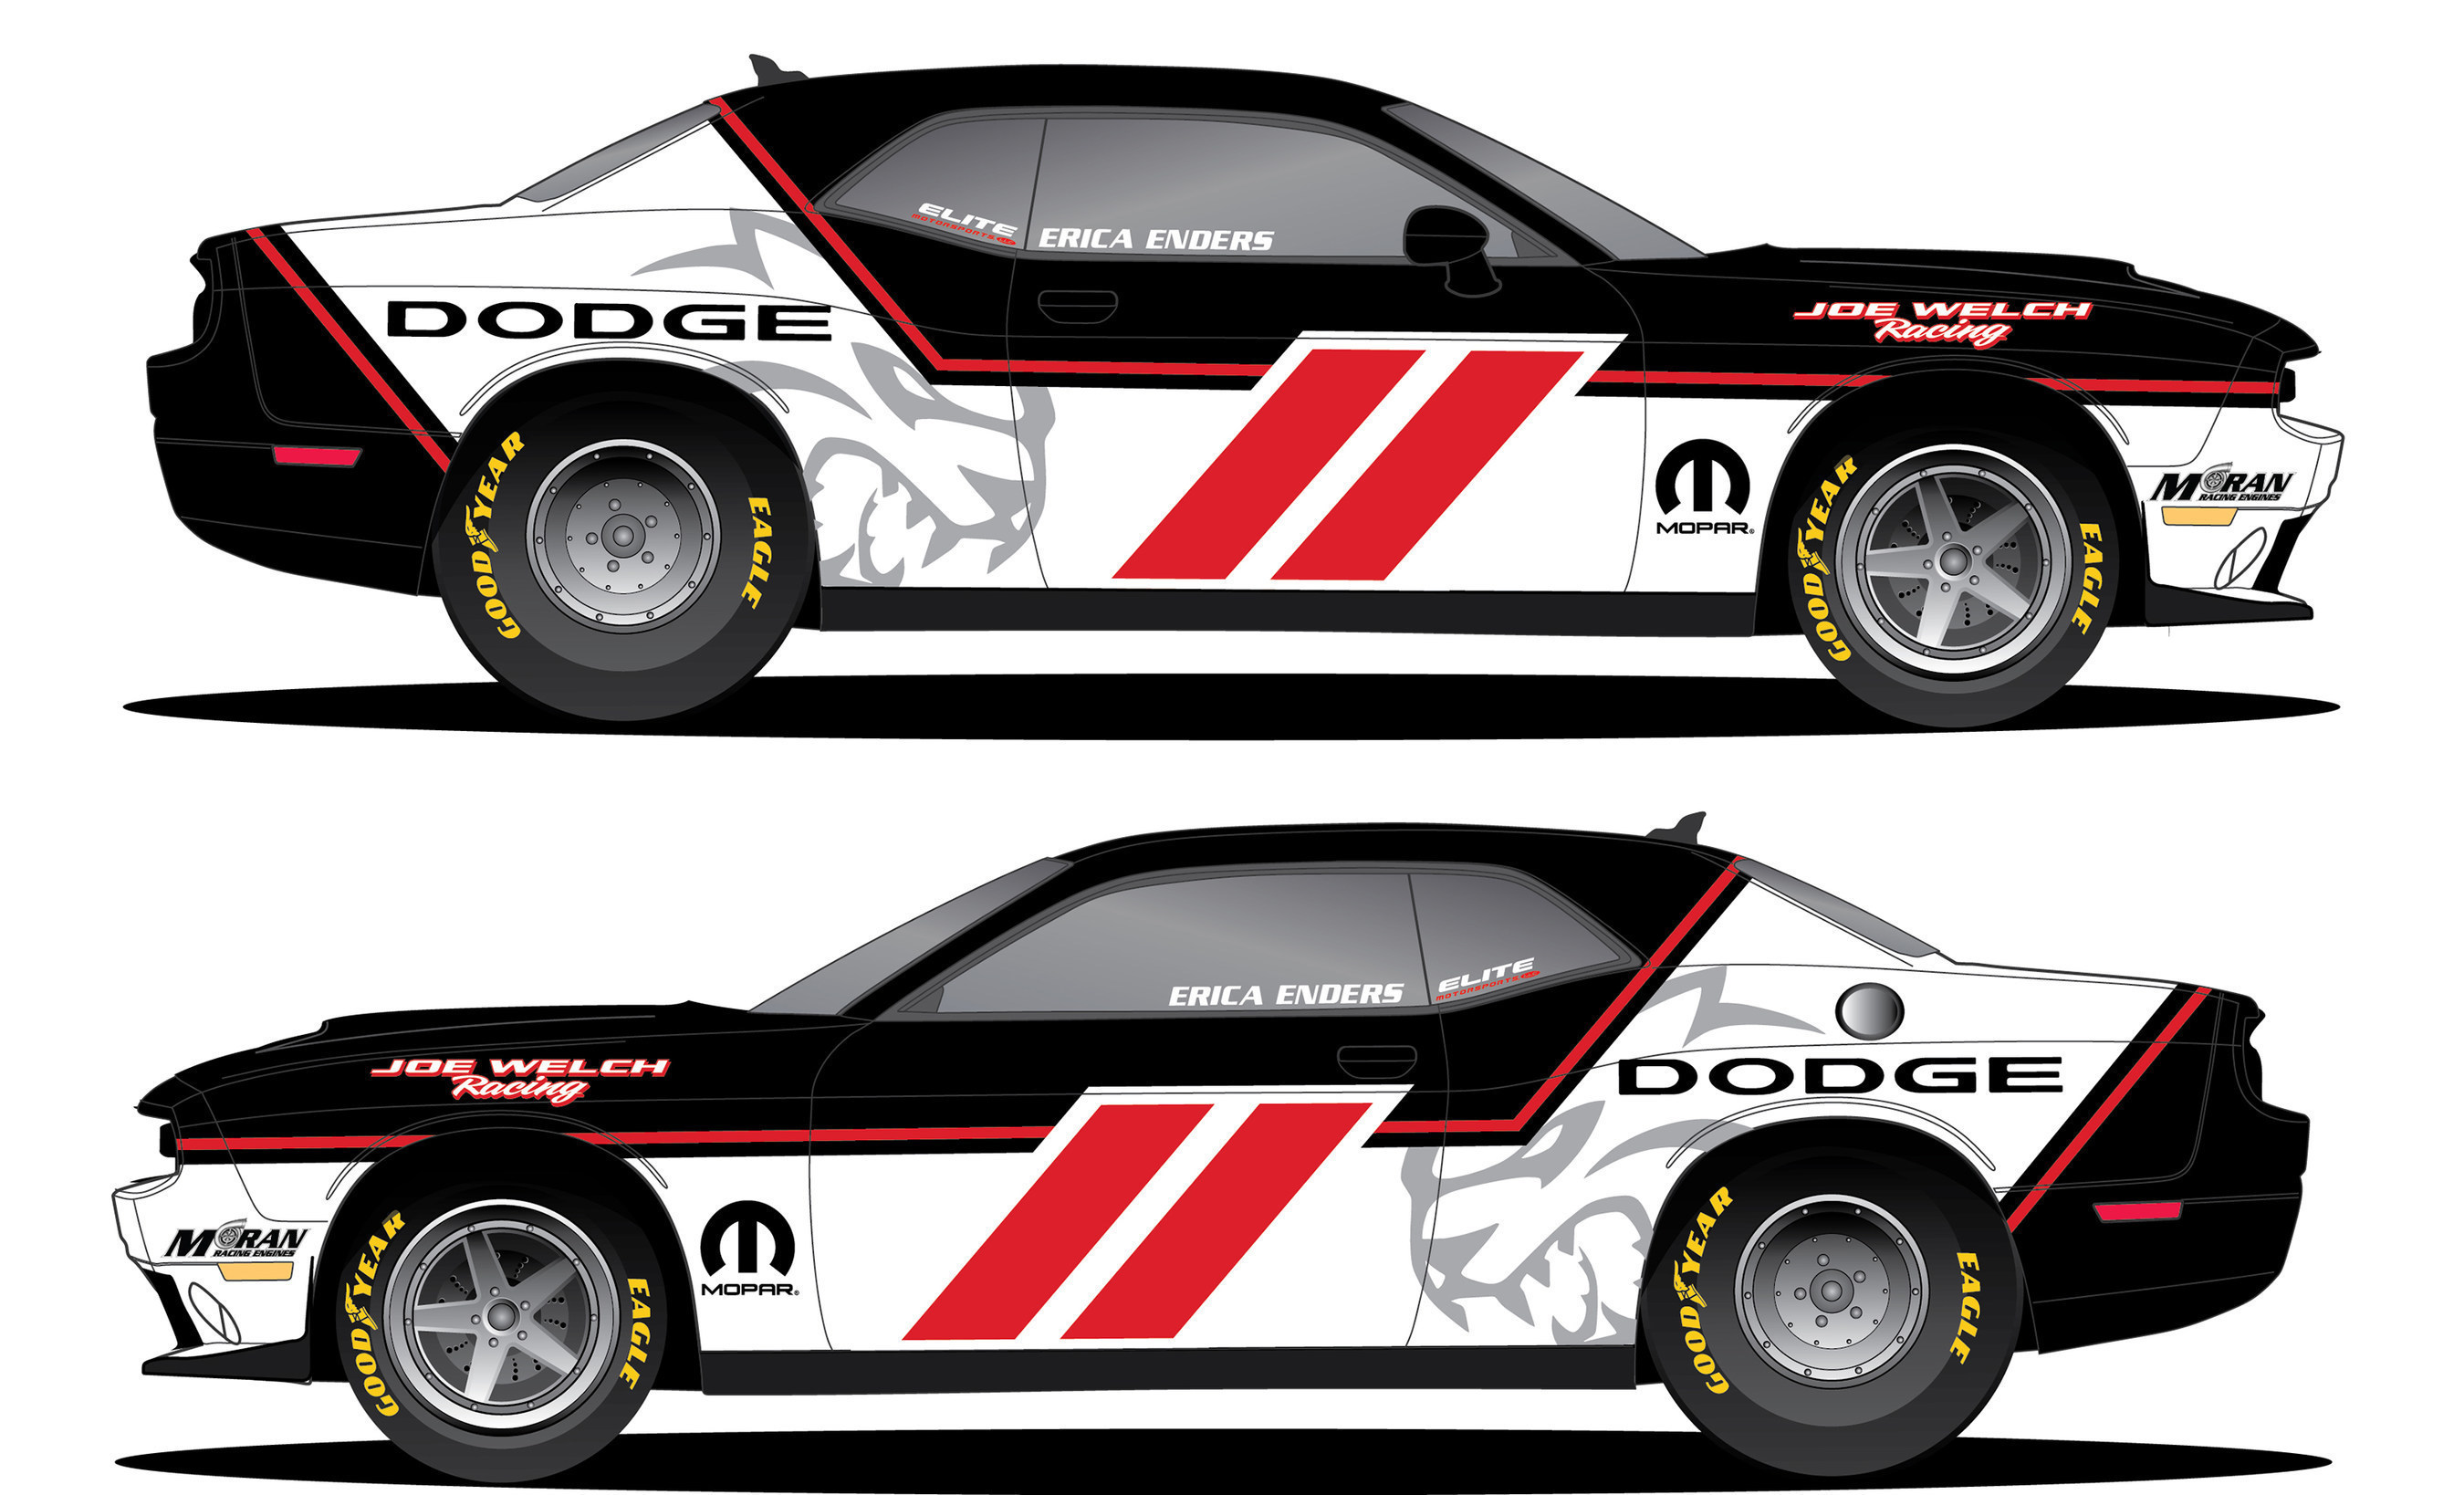 Two-time NHRA Pro Stock champ Erica Enders will perform double duty at the NHRA U.S. Nationals. In addition to driving her Mopar Performance Dodge Dart Pro Stock machine, Enders will also race a Mopar Dodge Challenger Drag Pak in the Factory Stock Showdown at Indy.